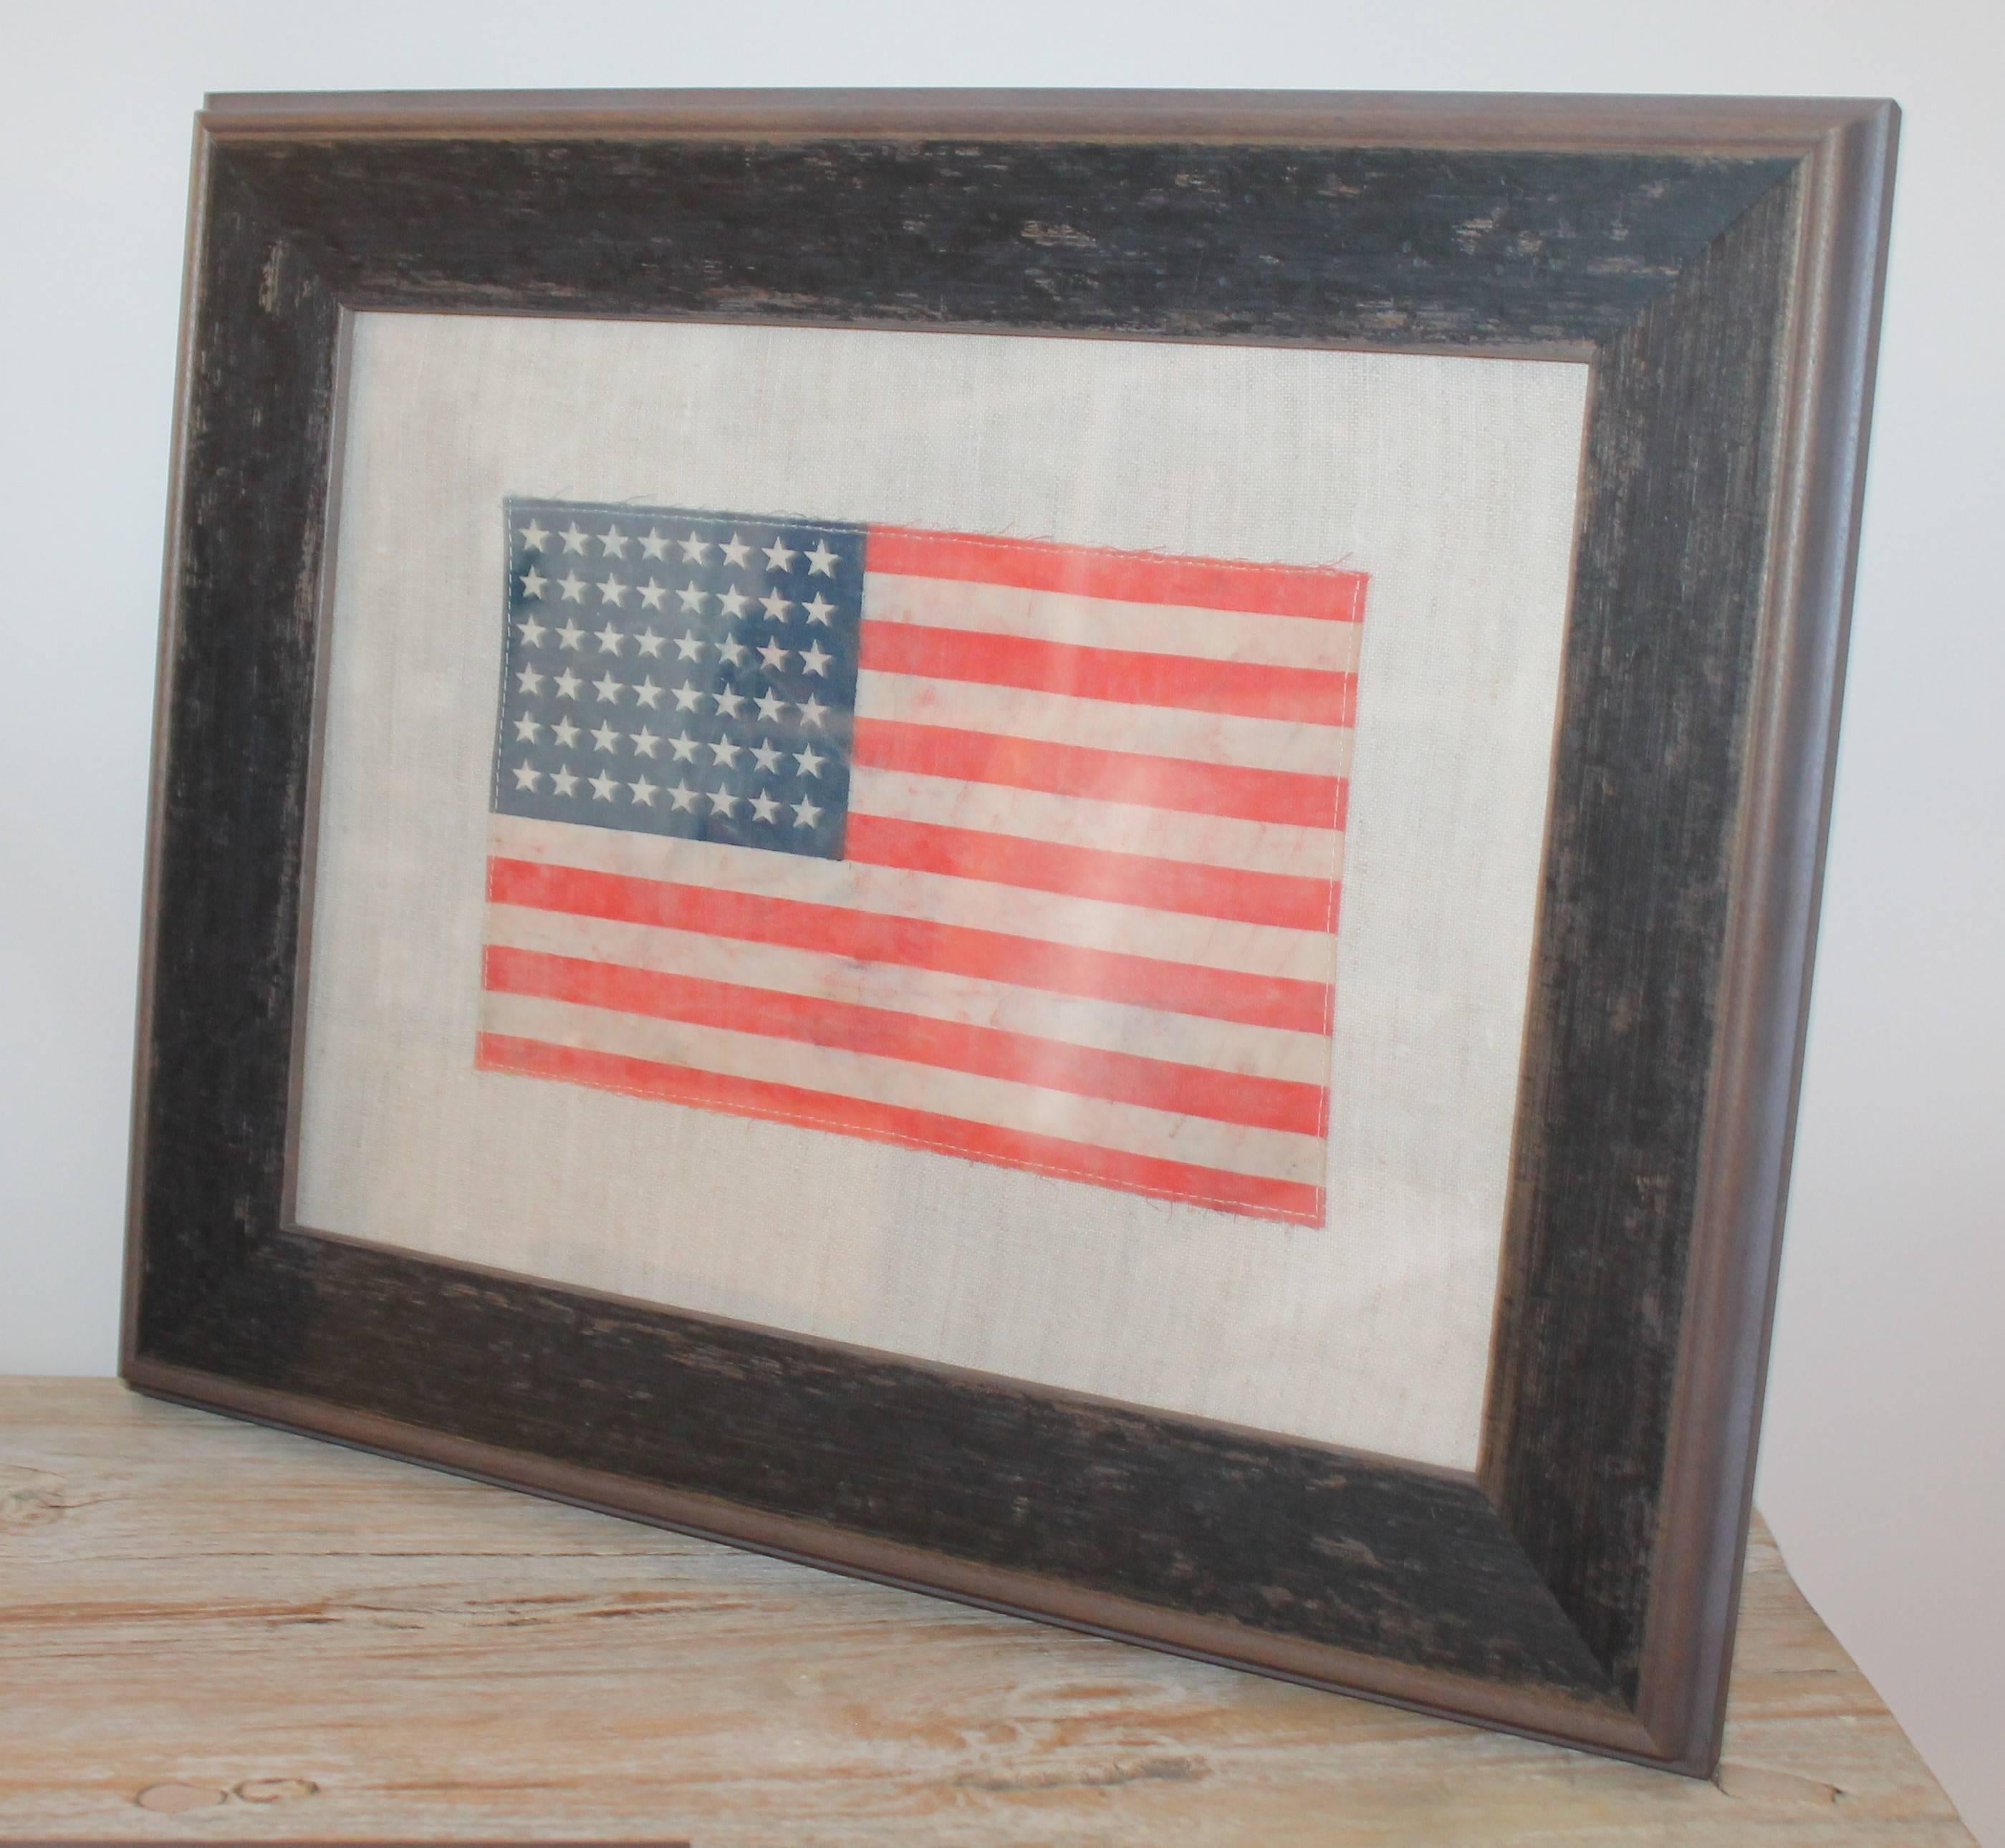 48 star flag is made from a vintage oil cloth sewn on vintage linen. The frame is a custom made frame on each. Each Measures 14 x 17.5.

If anyone would like to purchase all three, we offer all three @ $2,295.
     